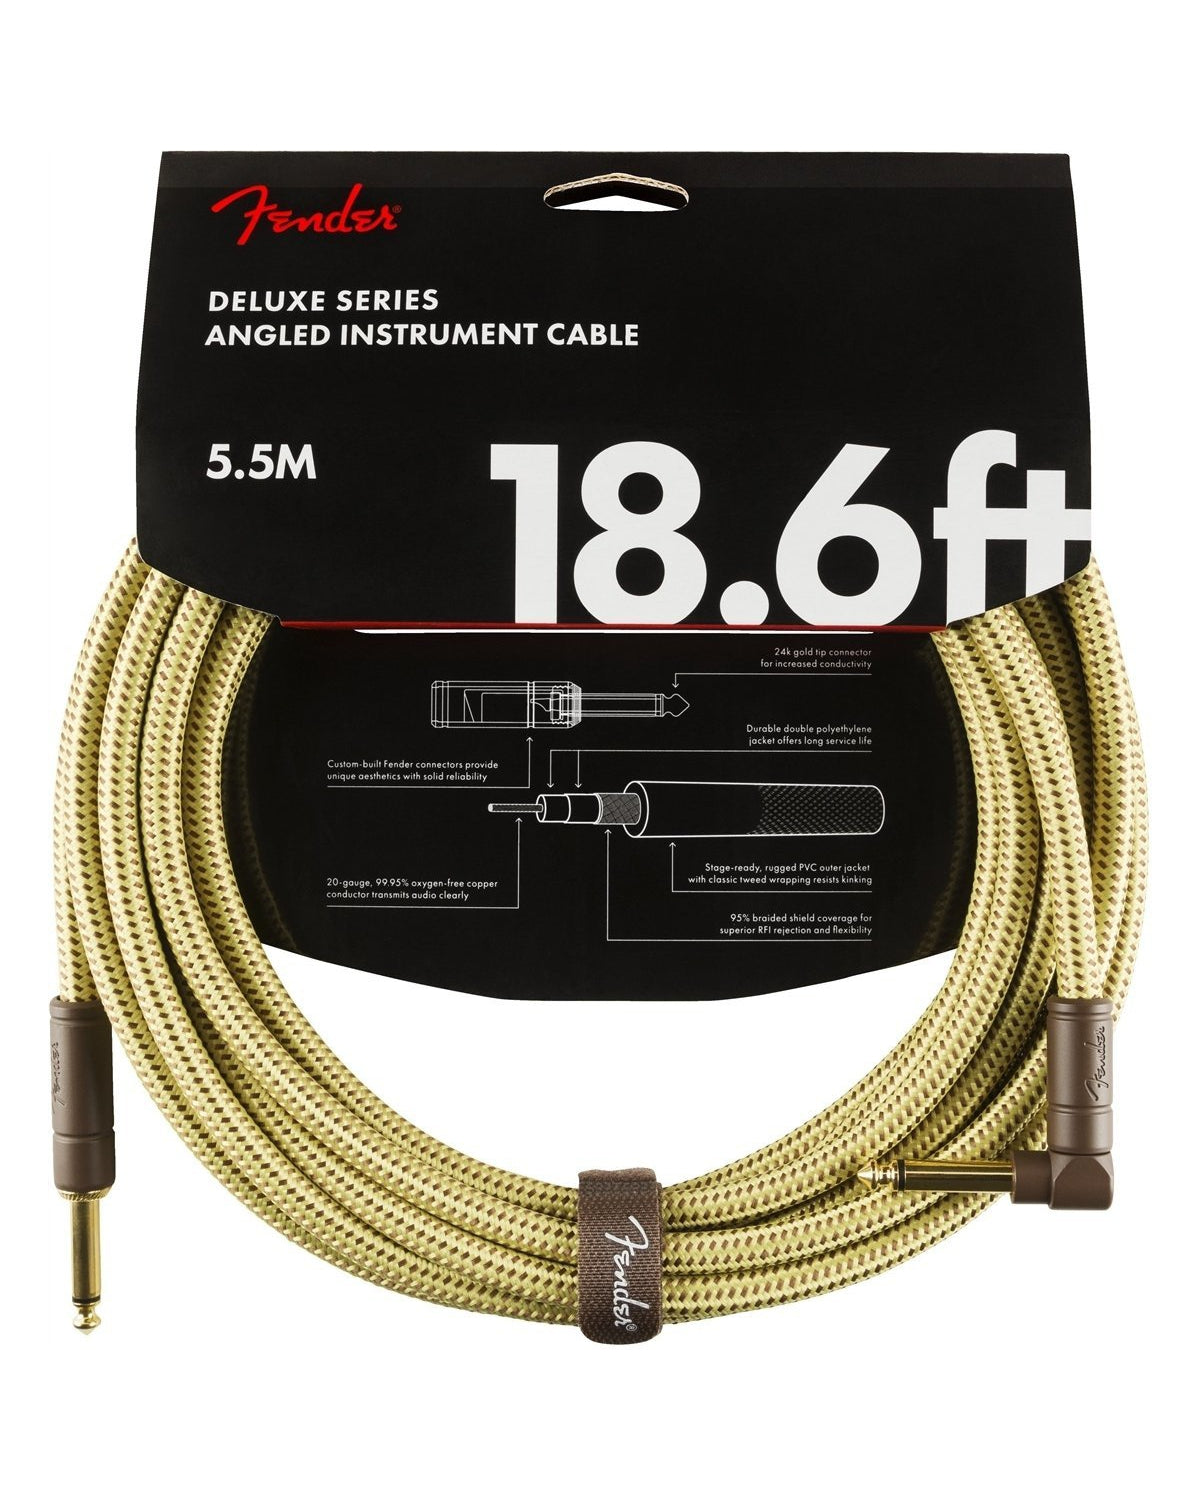 Front of Fender Deluxe Series Instrument Cable in packaging